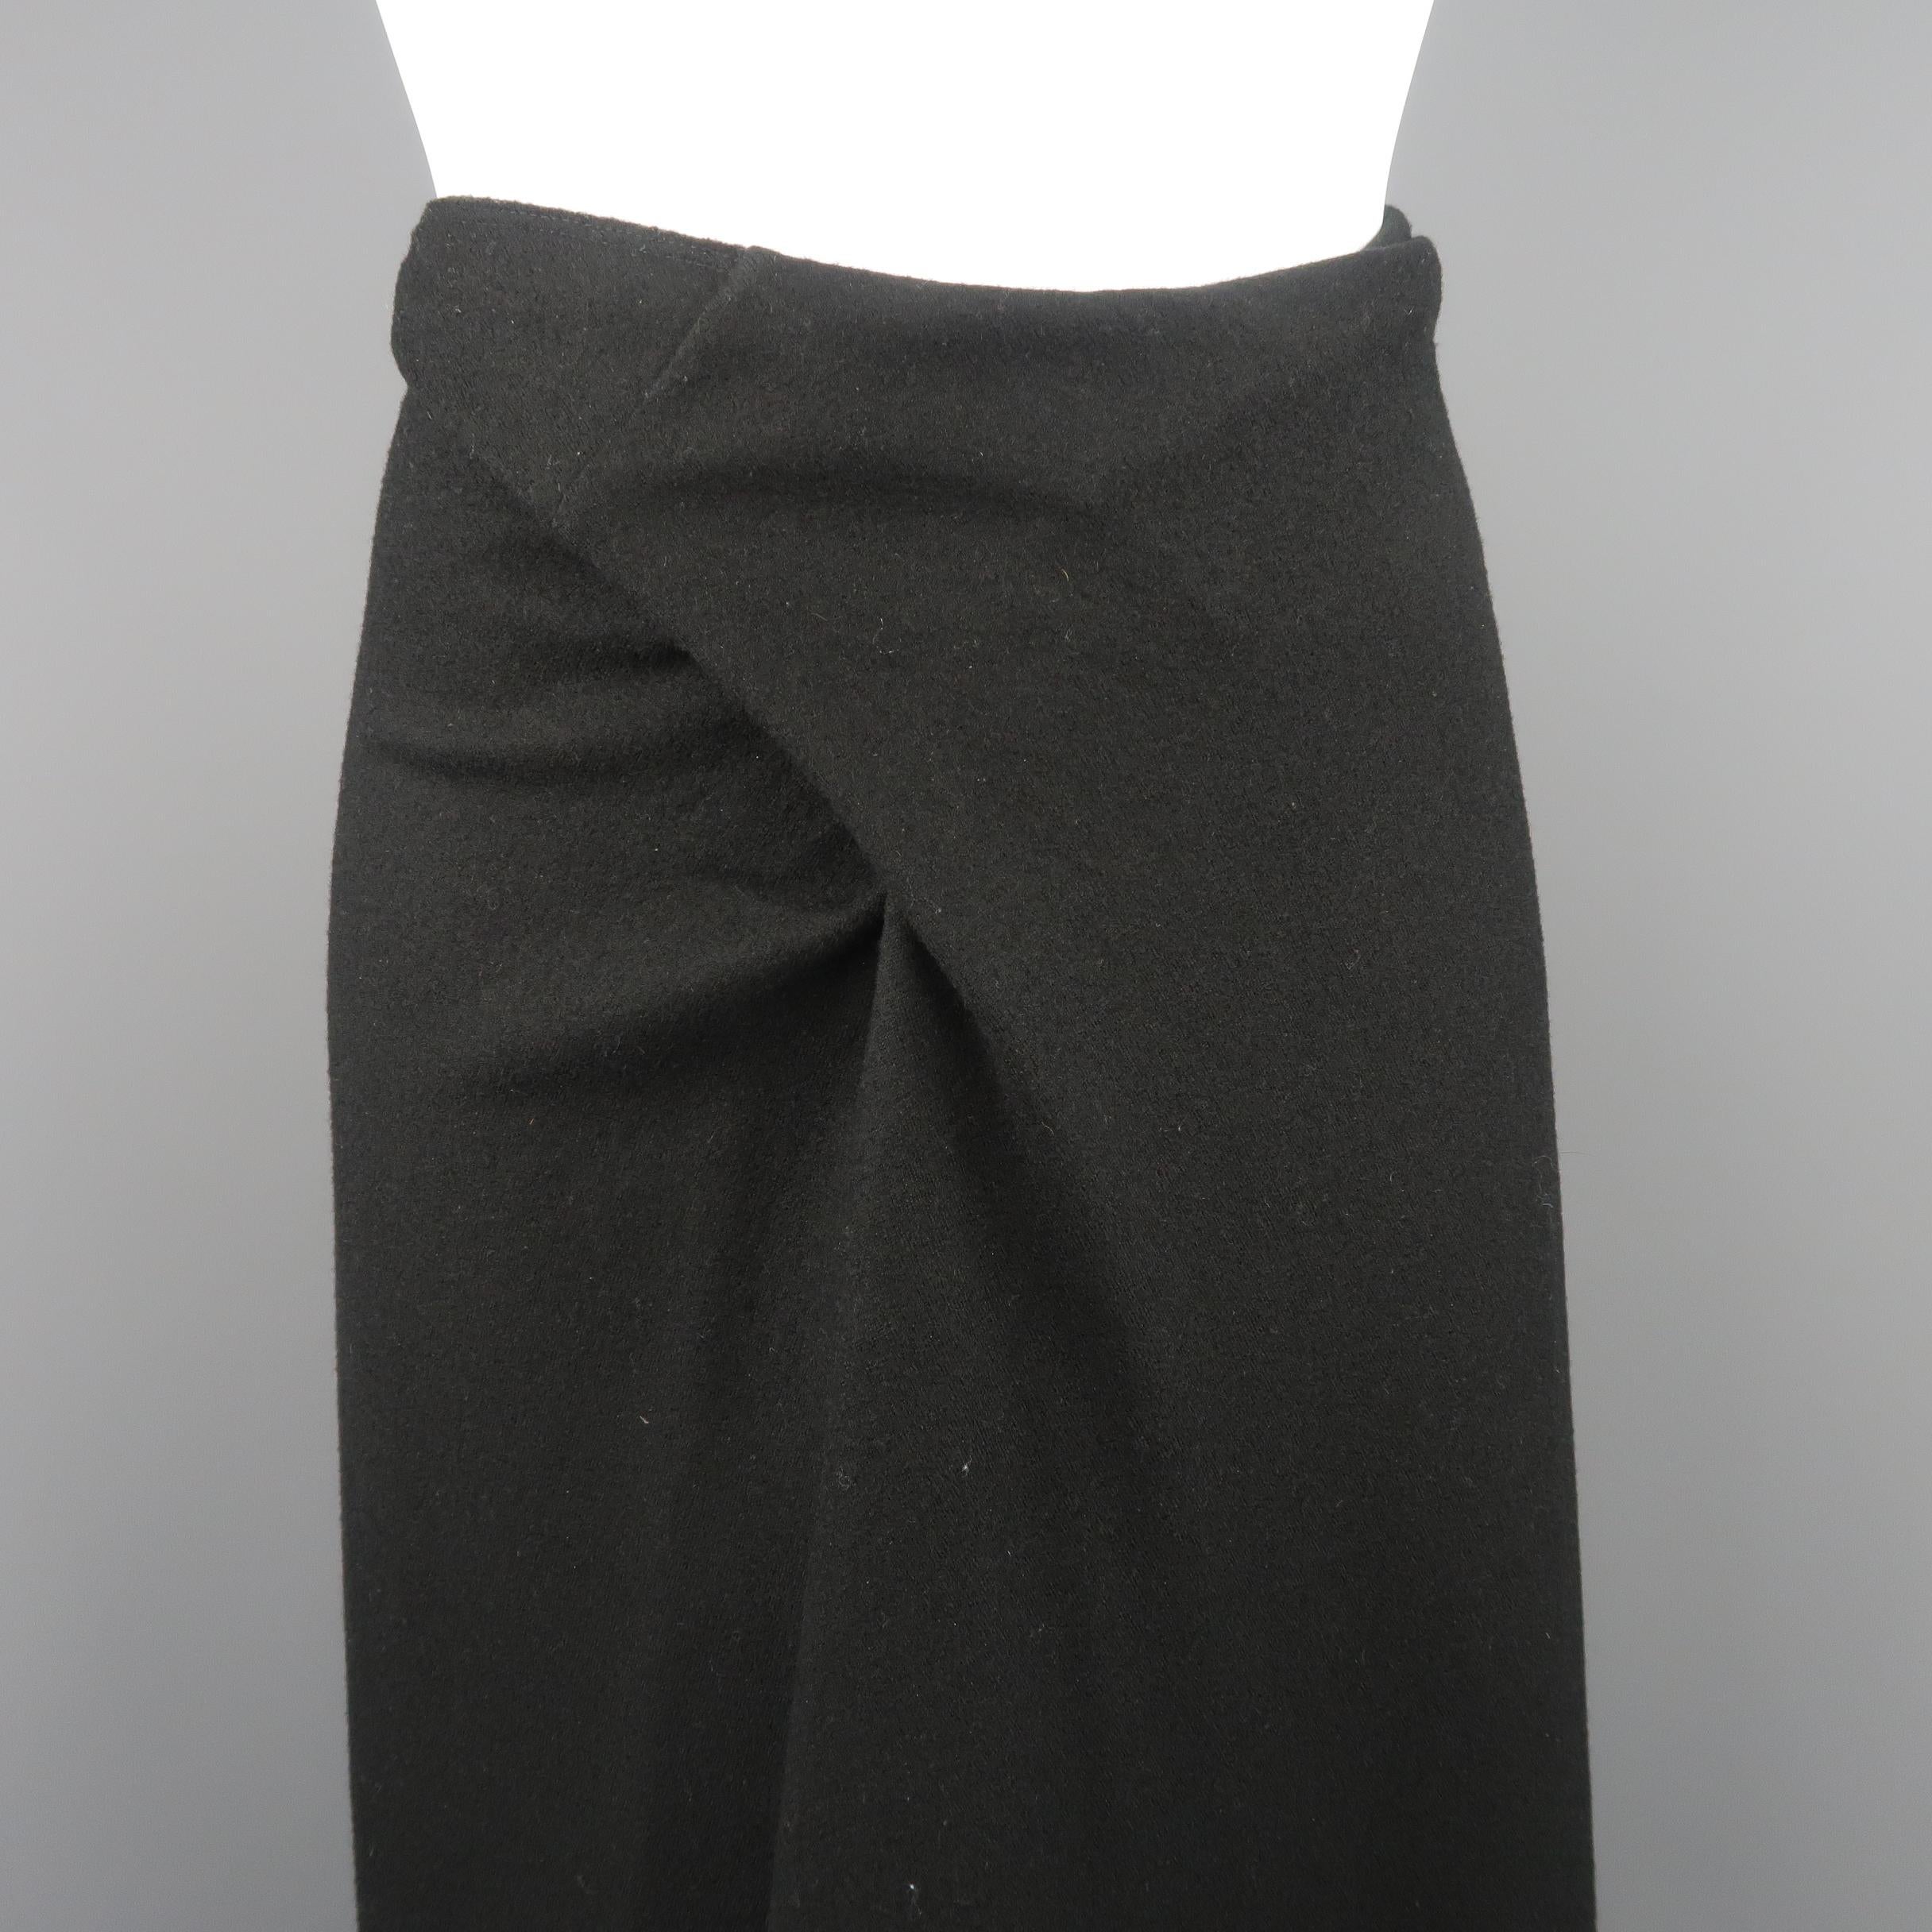 Vintage ISSEY MIYAKE skirt comes in black wool flannel with a twisted waistband and wrap pleated front. Made in Japan.
 
Good Pre-Owned Condition.
Marked: JP 4
 
Measurements:
 
Waist: 33 in.
Hip: 40 in.
Length: 33 in.